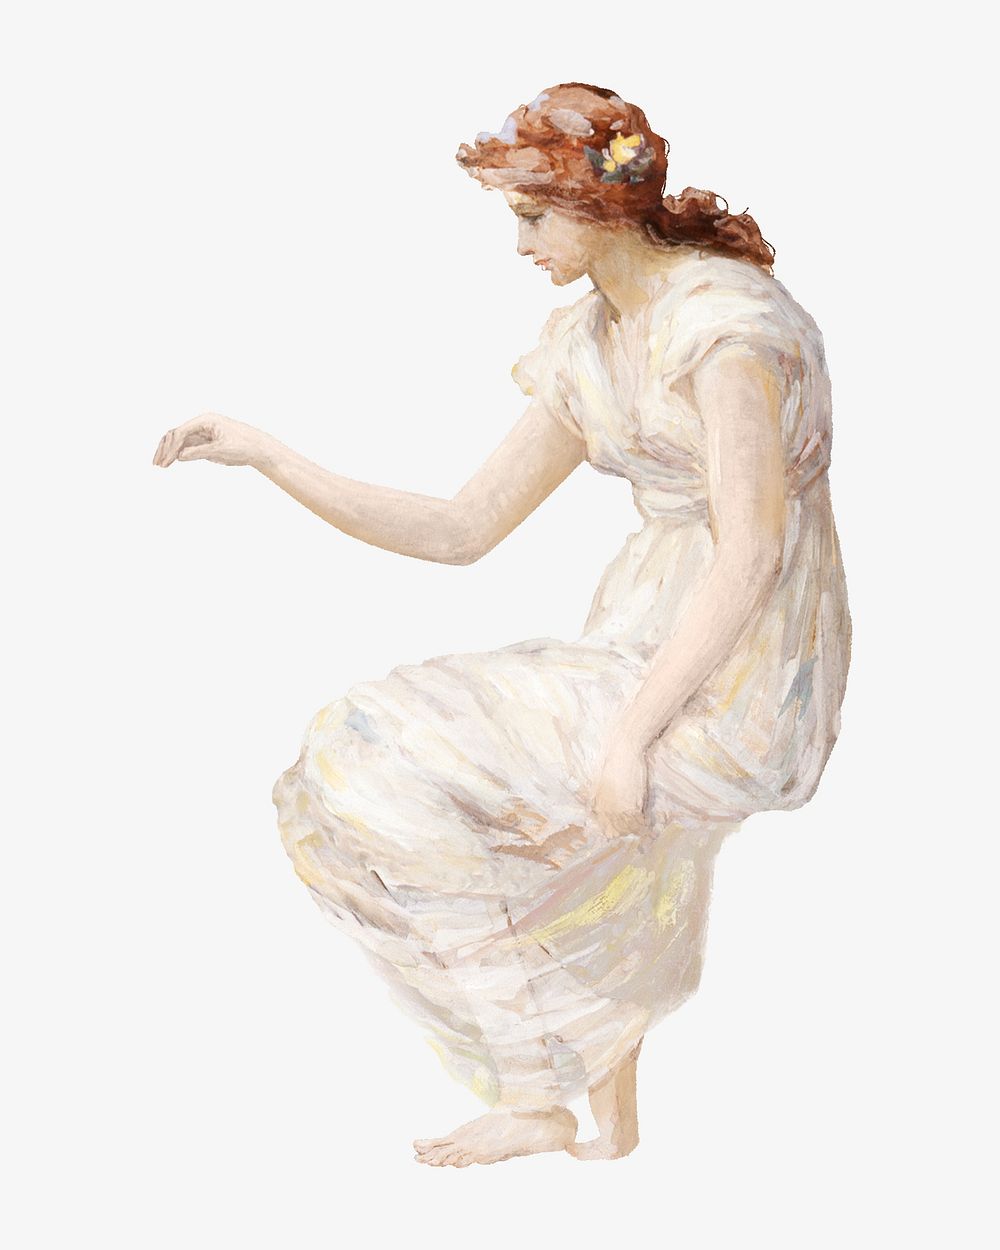 Vintage woman in white dress illustration by Frederick Stuart Church. Remixed by rawpixel.